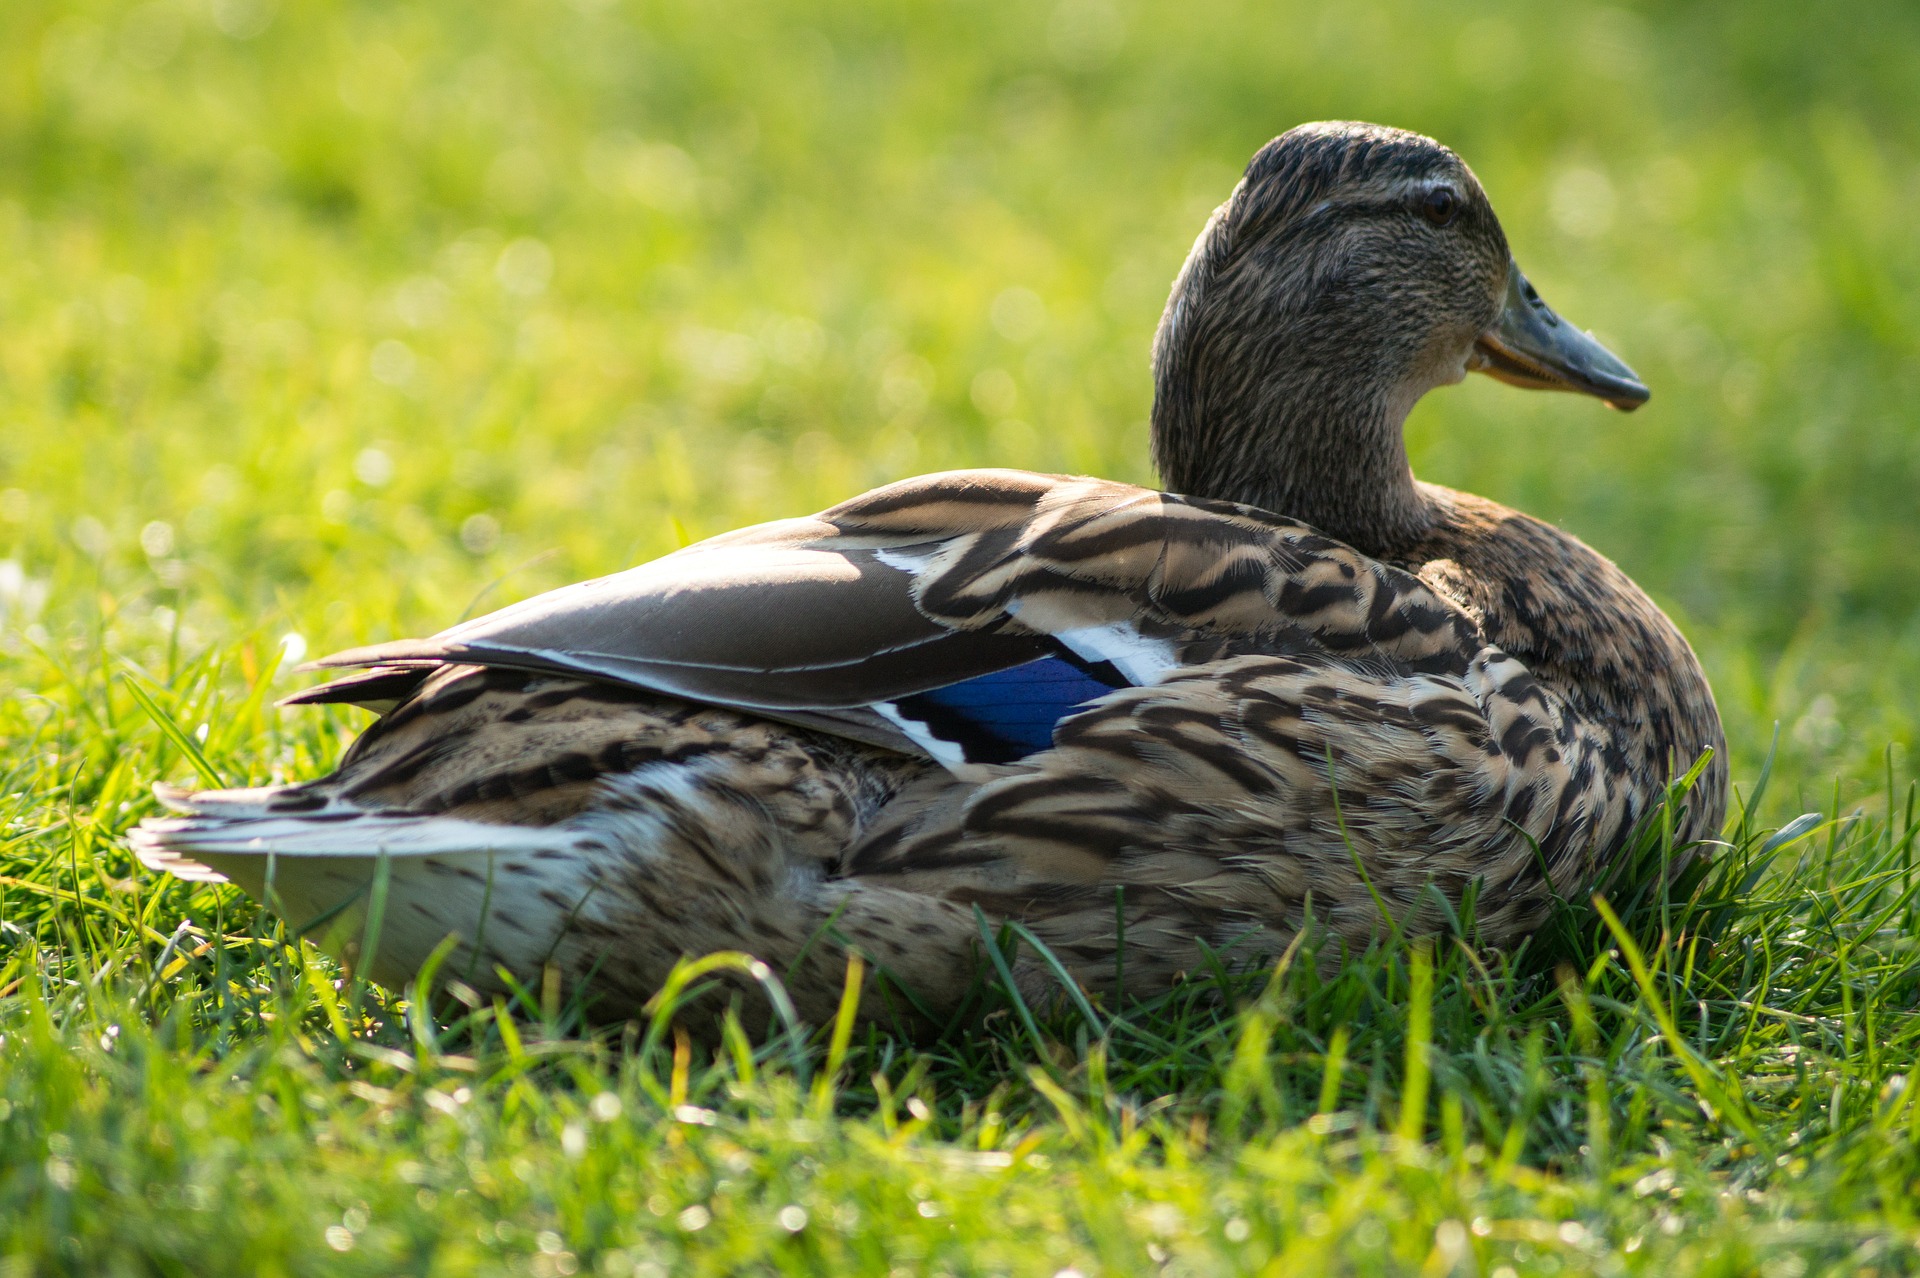 Sitting Ducks: When Employees Work from Home